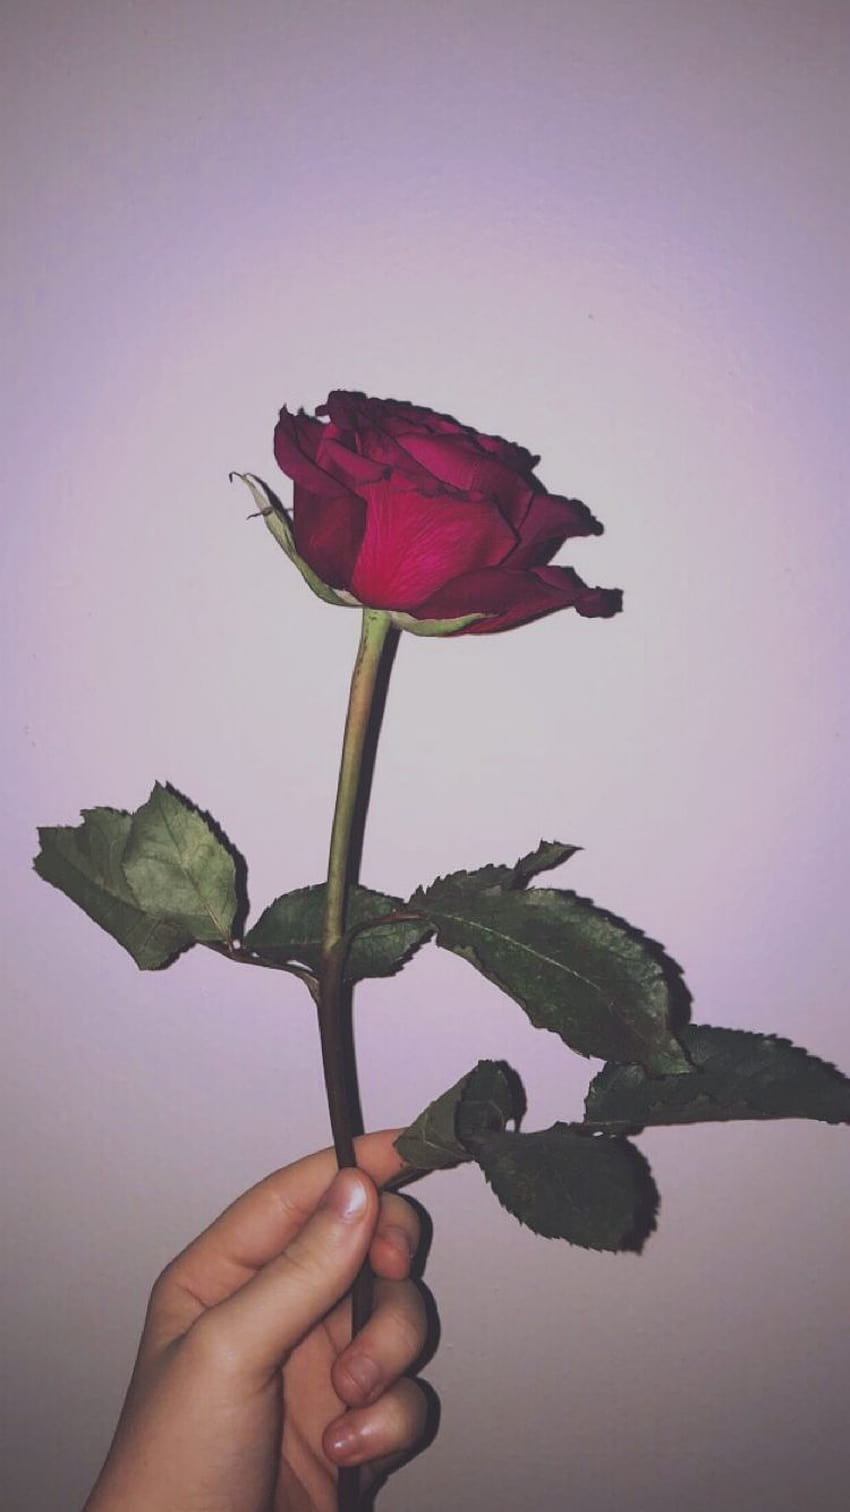 Aesthetic Rose posted by Zoey Sellers, aesthetics flower grunge HD phone wallpaper